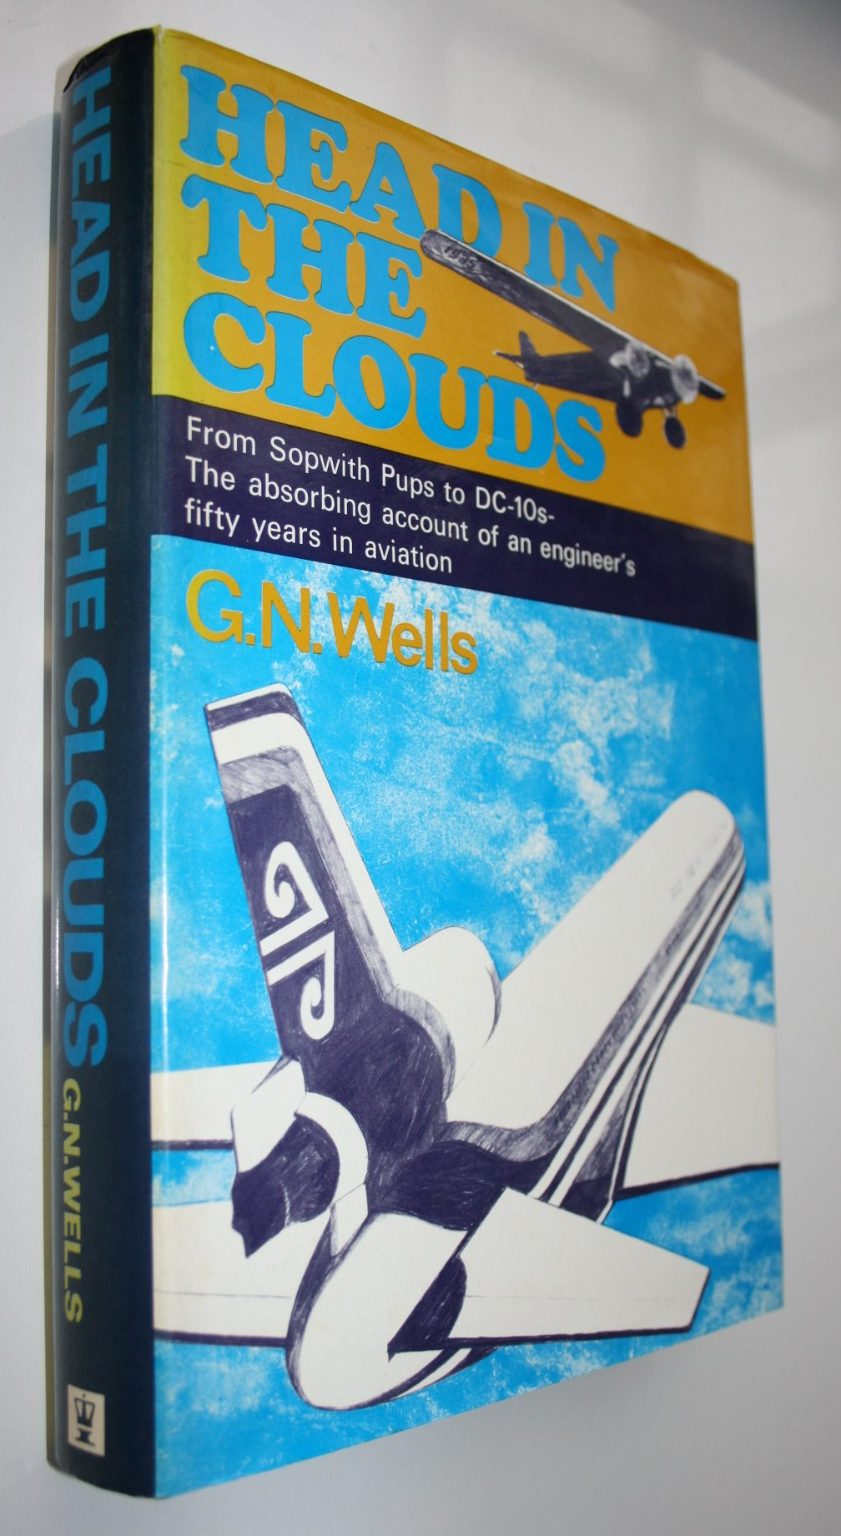 Head in the Clouds. SIGNED by Geoff N. Wells